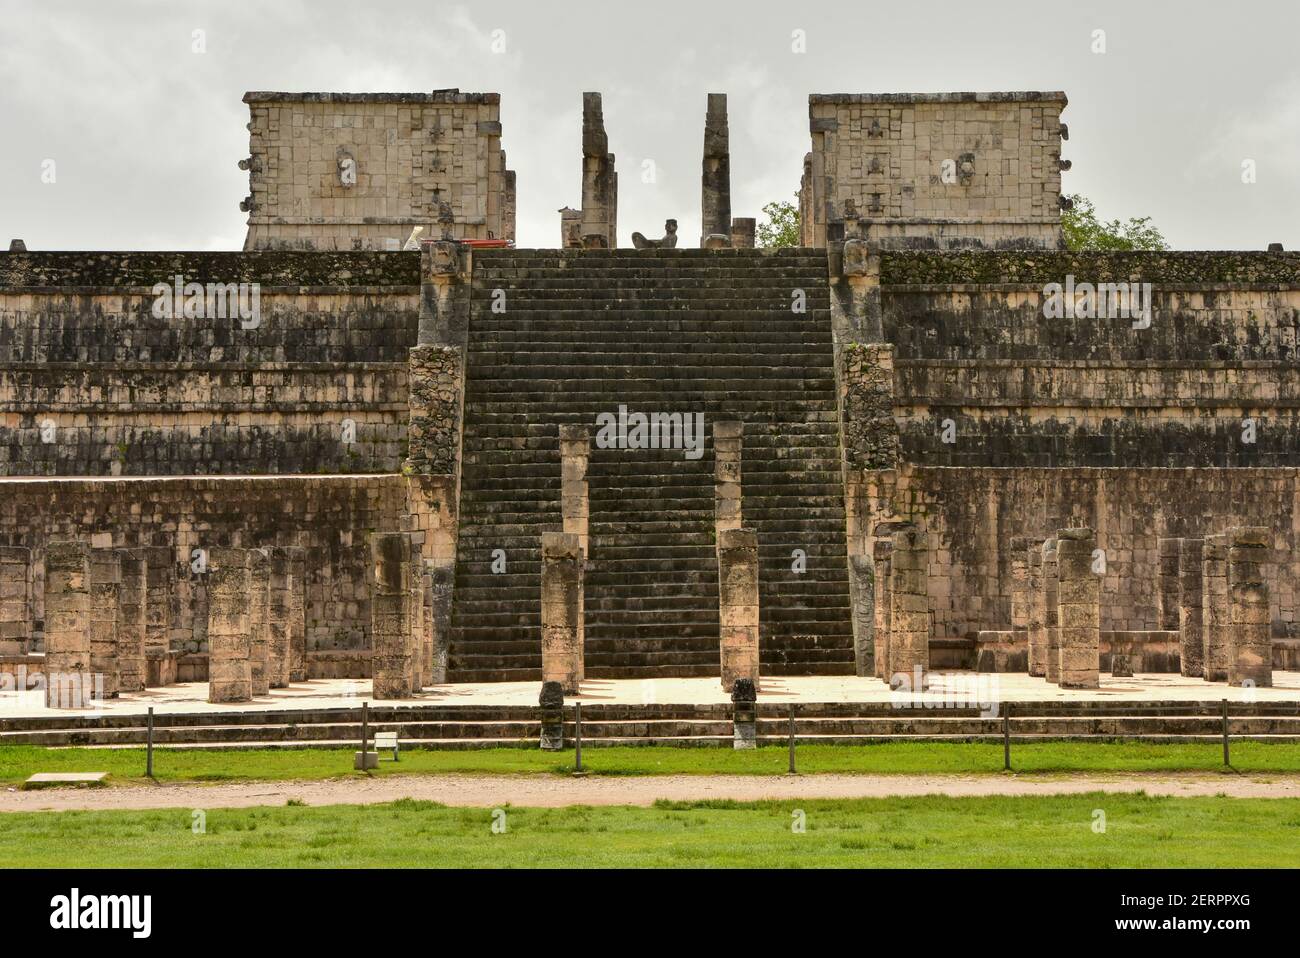 The Temple of the Warriors, showing a statue of Chacmool, at Chichen Itza in Mexico, a large pre-Columbian city built by the Maya people Stock Photo